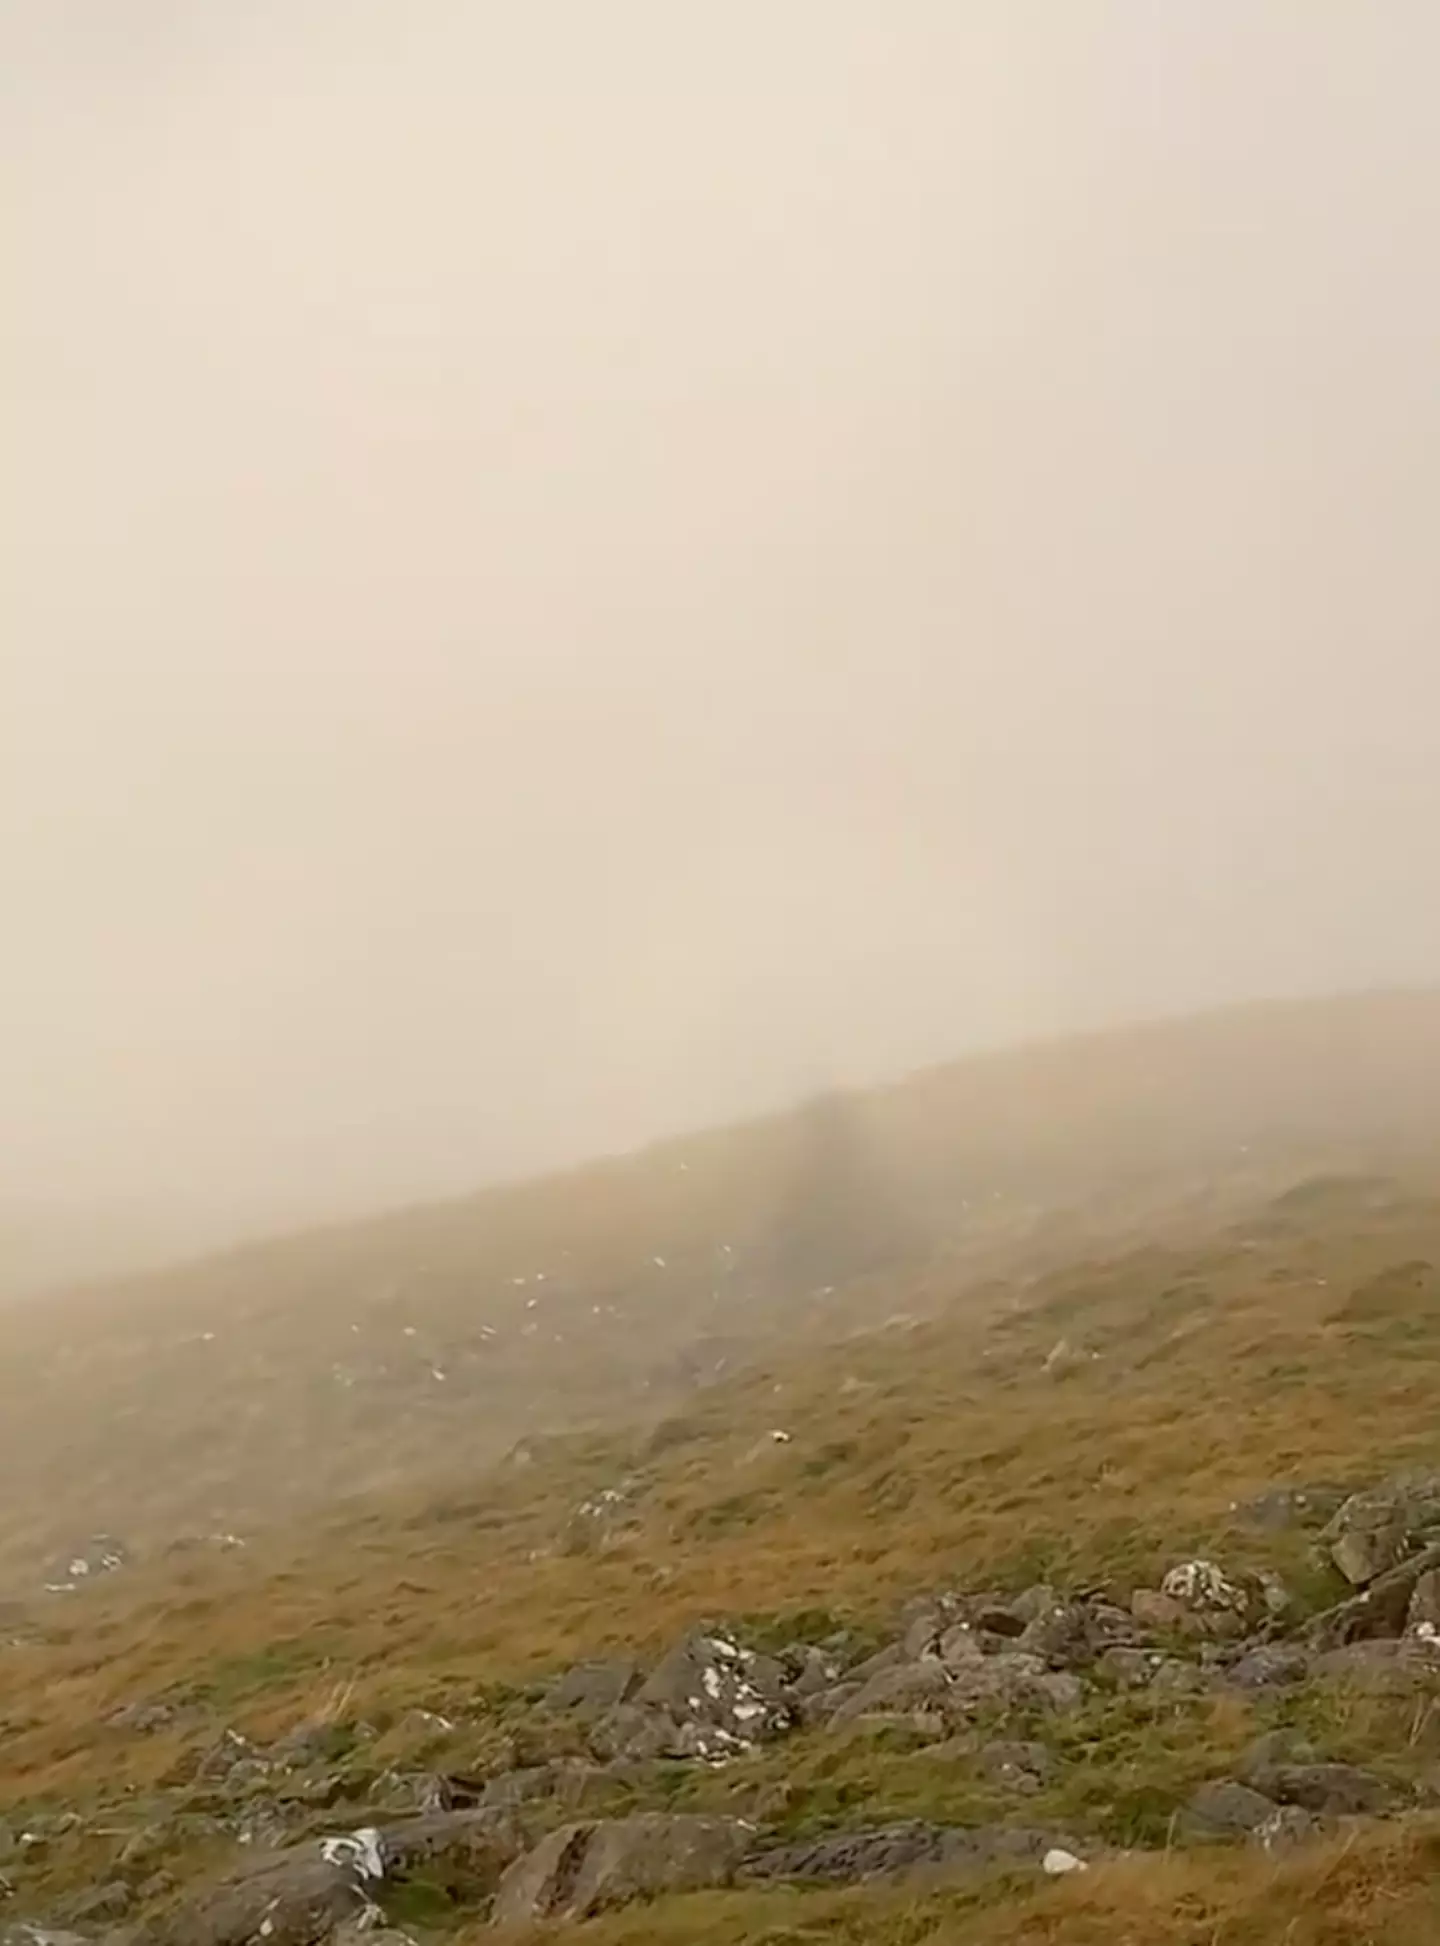 Chris new that he was seeing a Brocken spectre, but many people wouldn't have.